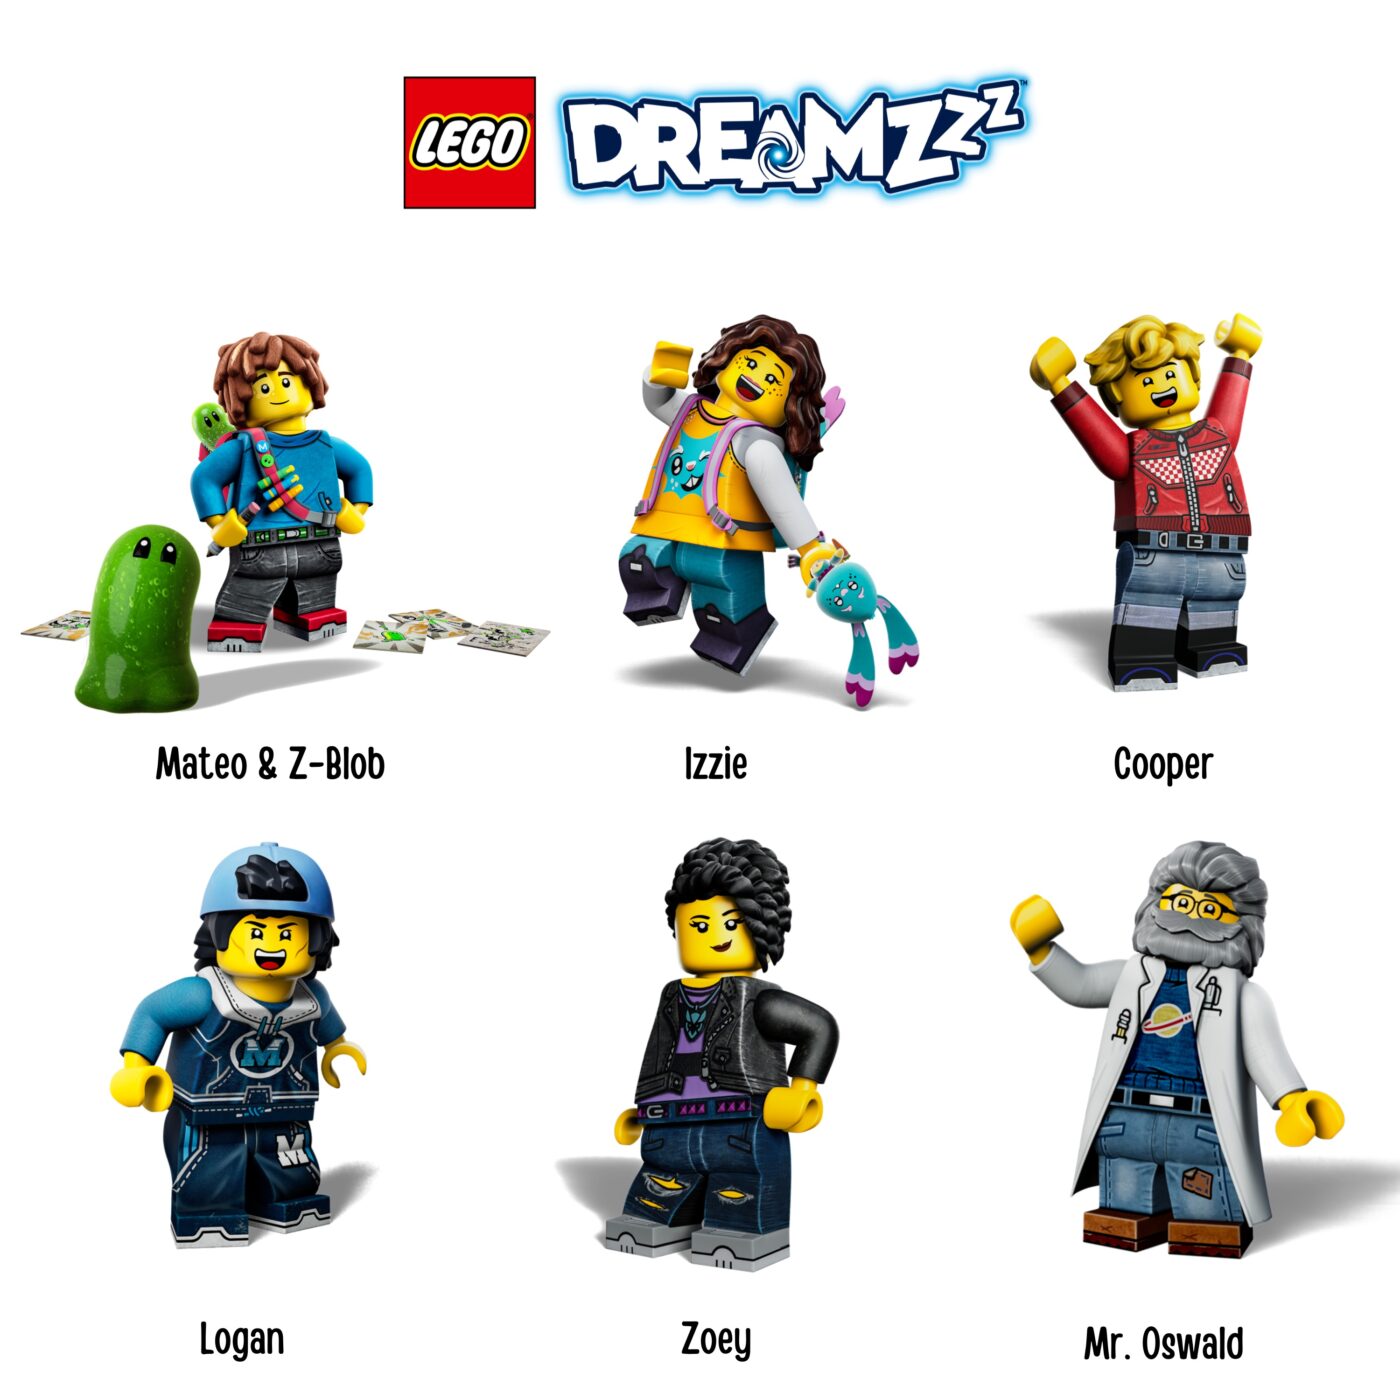 Welcome to a world of dreams, Lego dreamzzz Wiki